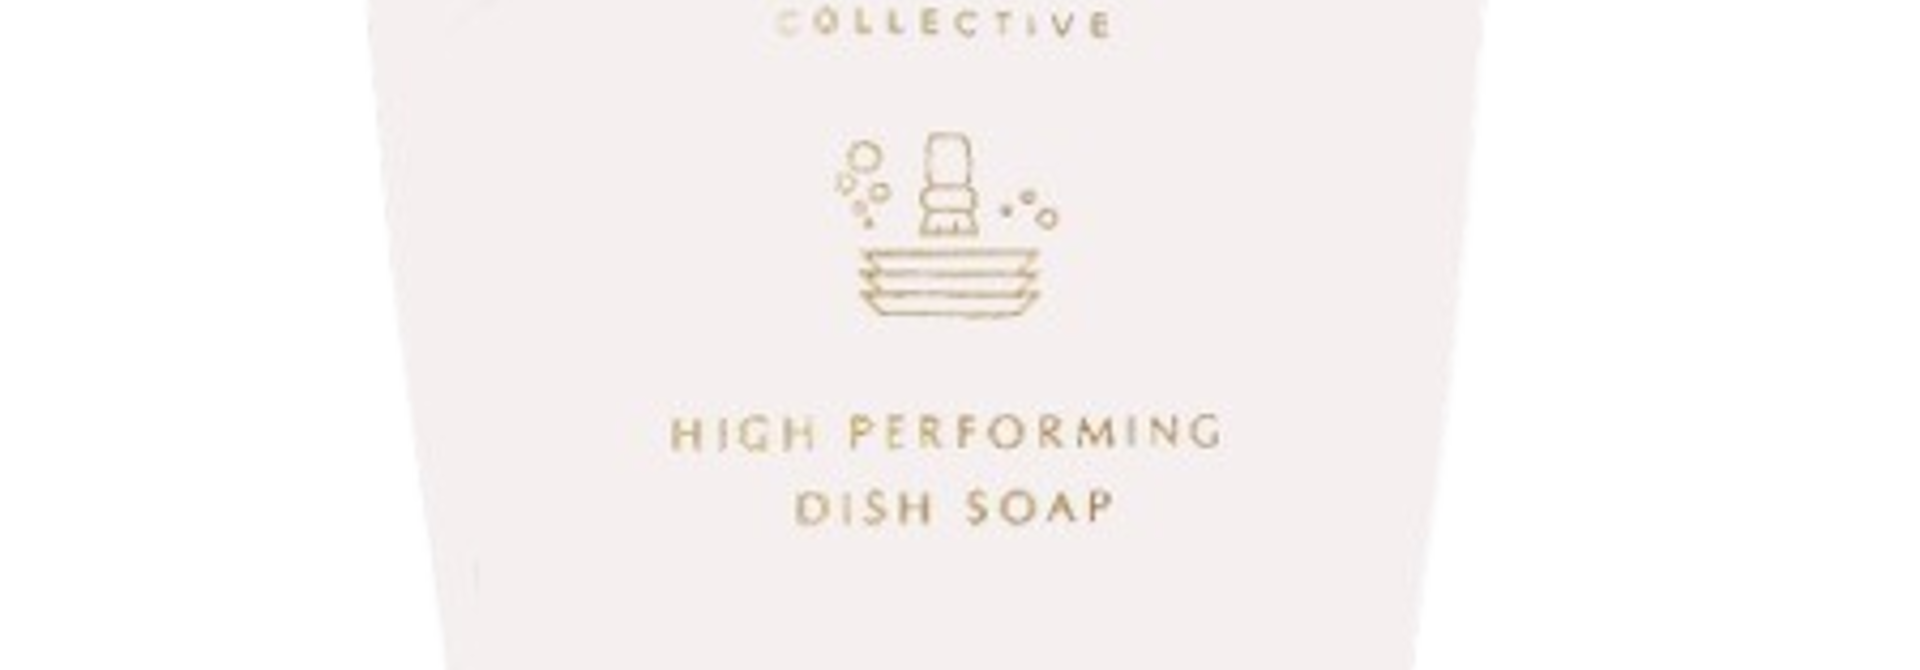 Blushed Bergamot | The Home Care Collection, Refill Pouch Dish Soap - 32 oz